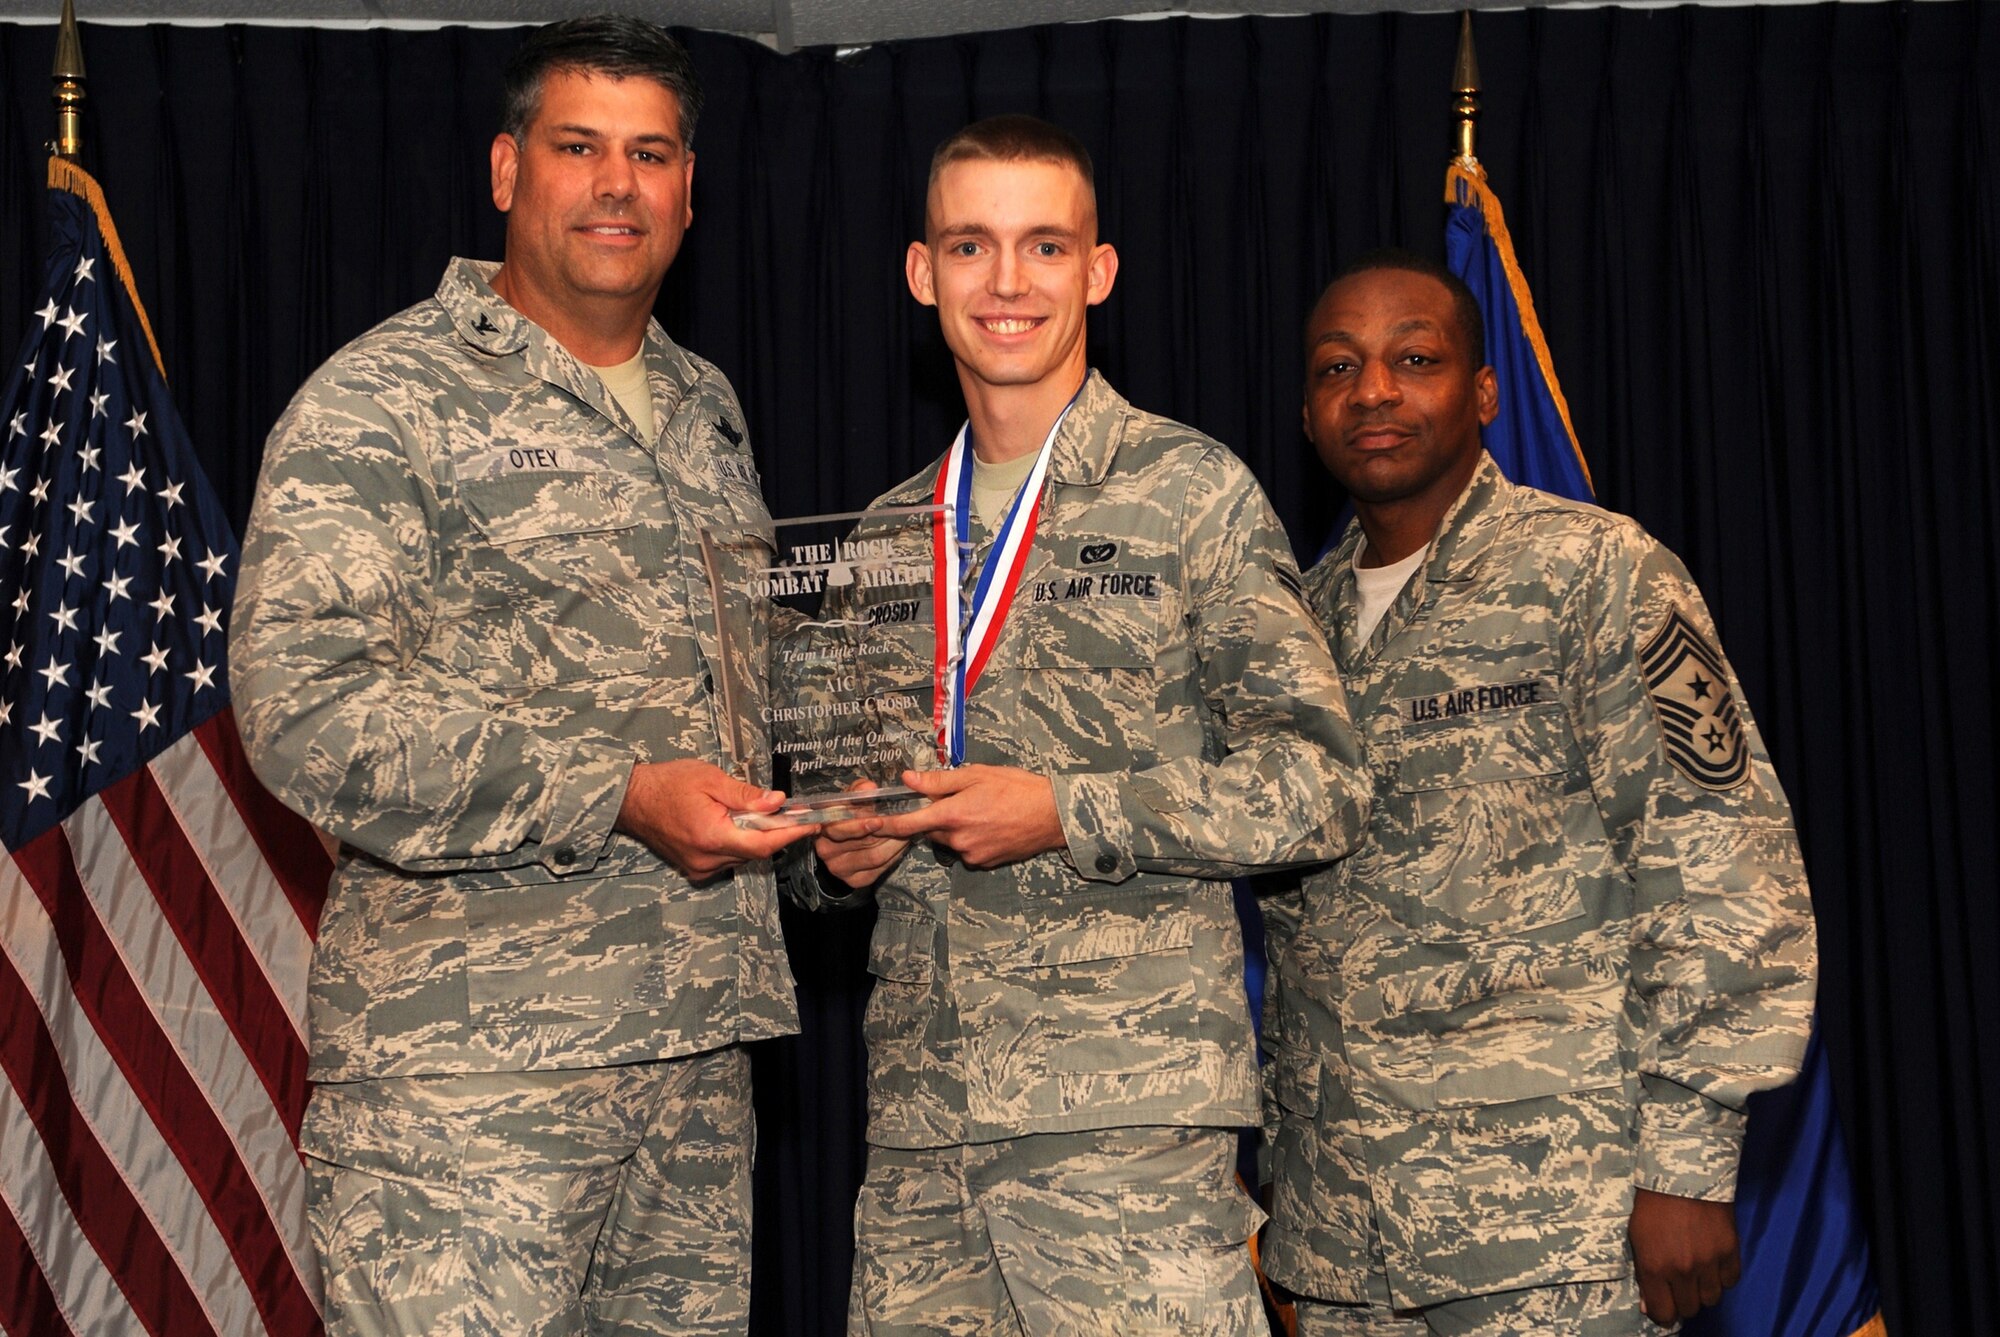 Col. Greg Otey, 19th Airlift Wing commander, and Chief Master Sgt. Anthony Brinkley, 19th Airlift Wing command chief, presents  Airman 1st Class Christopher Crosby, 19th Civil Engineer Squadron, a quarterly award for Airman of the quarter at Little Rock Air Force Base, Ark. July 30. (U. S. Air Force photo by Senior Airman Jim Araos)